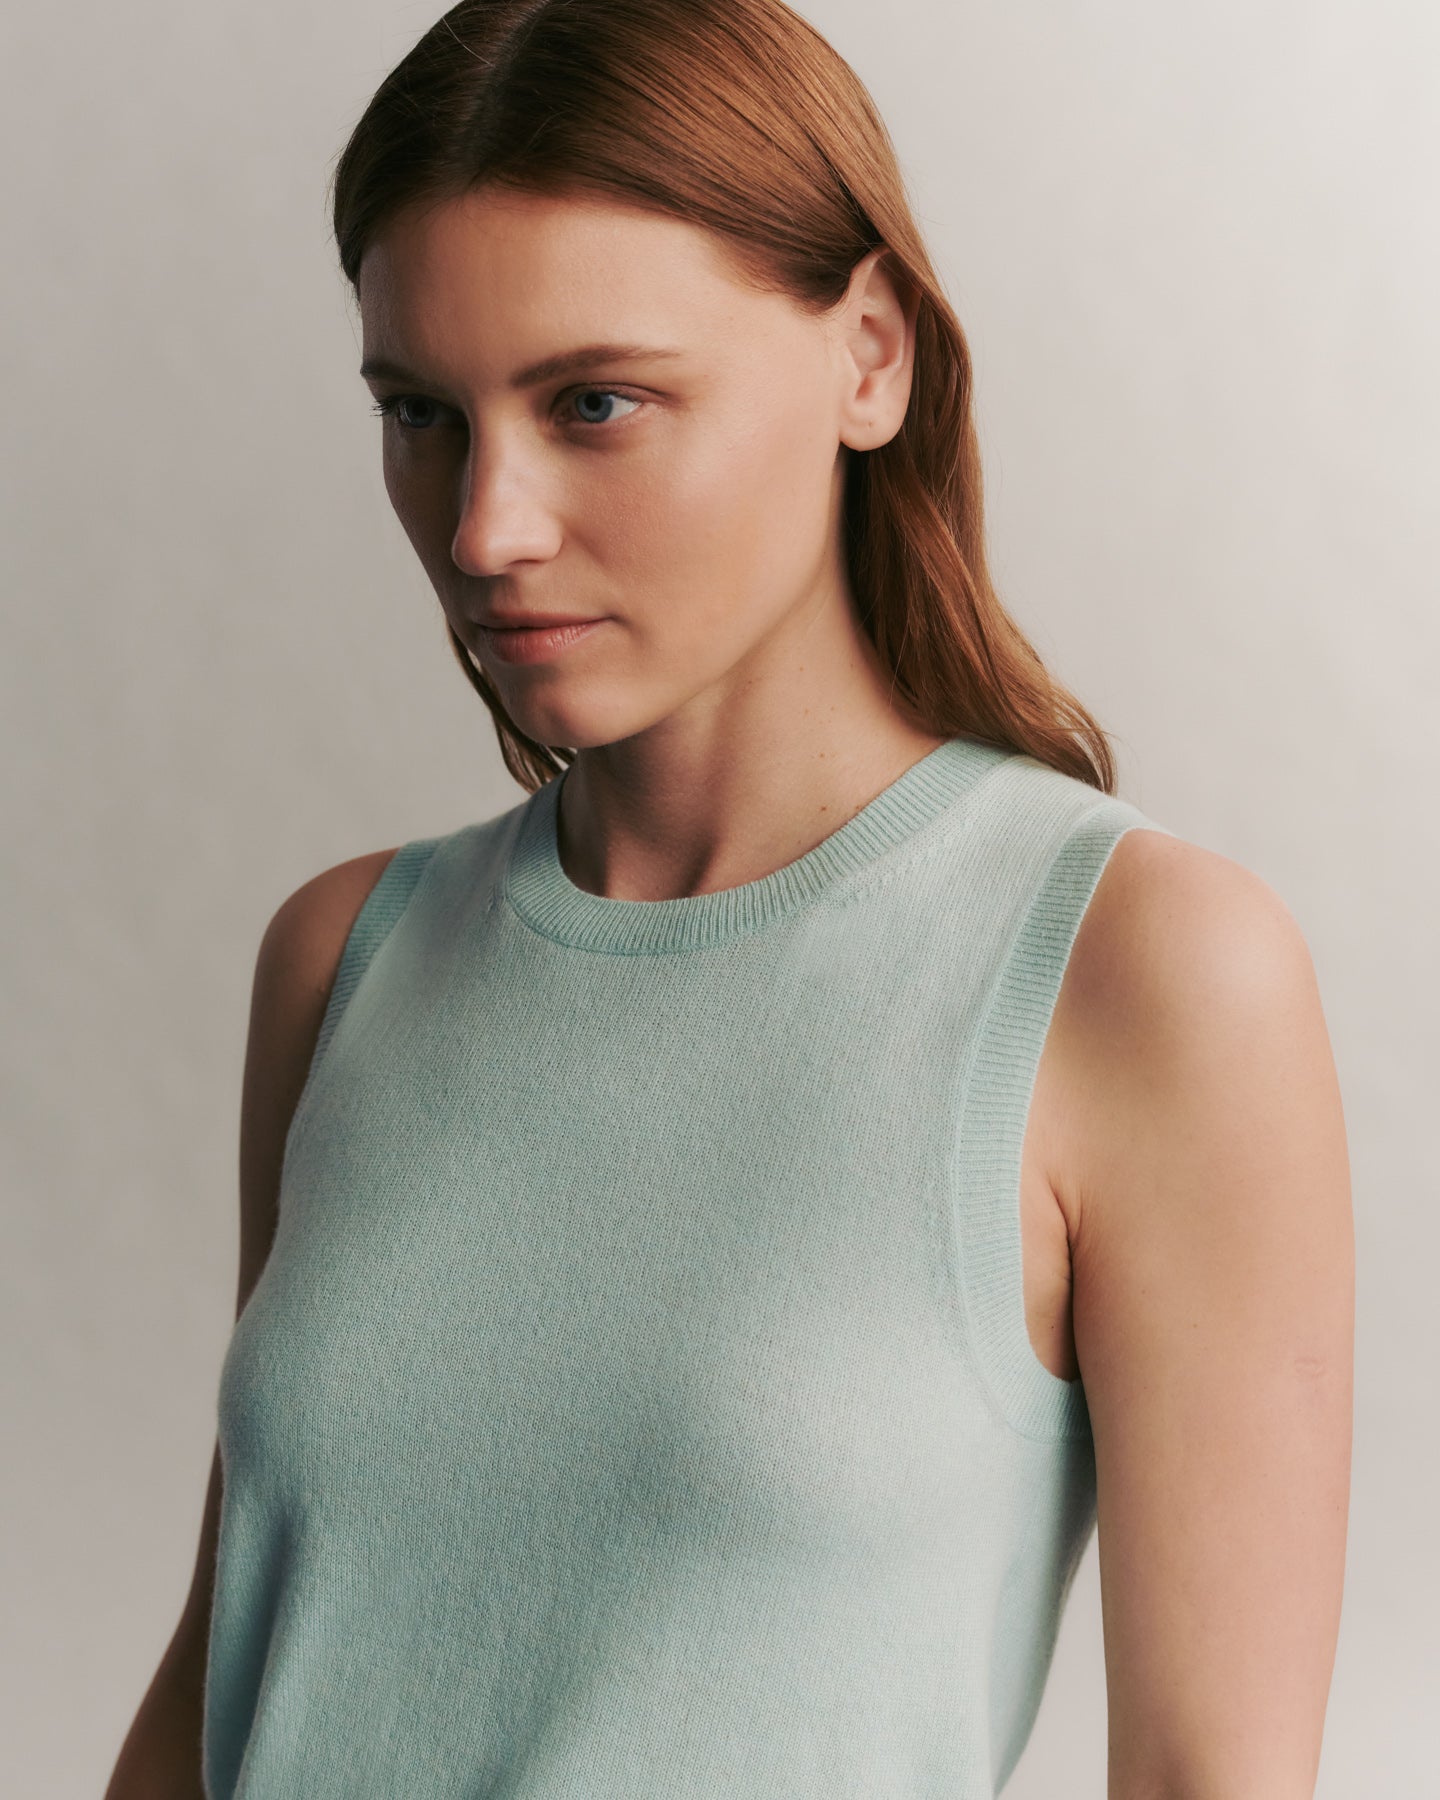 TWP Pale aqua Jenny's Tank in Cashmere view 3